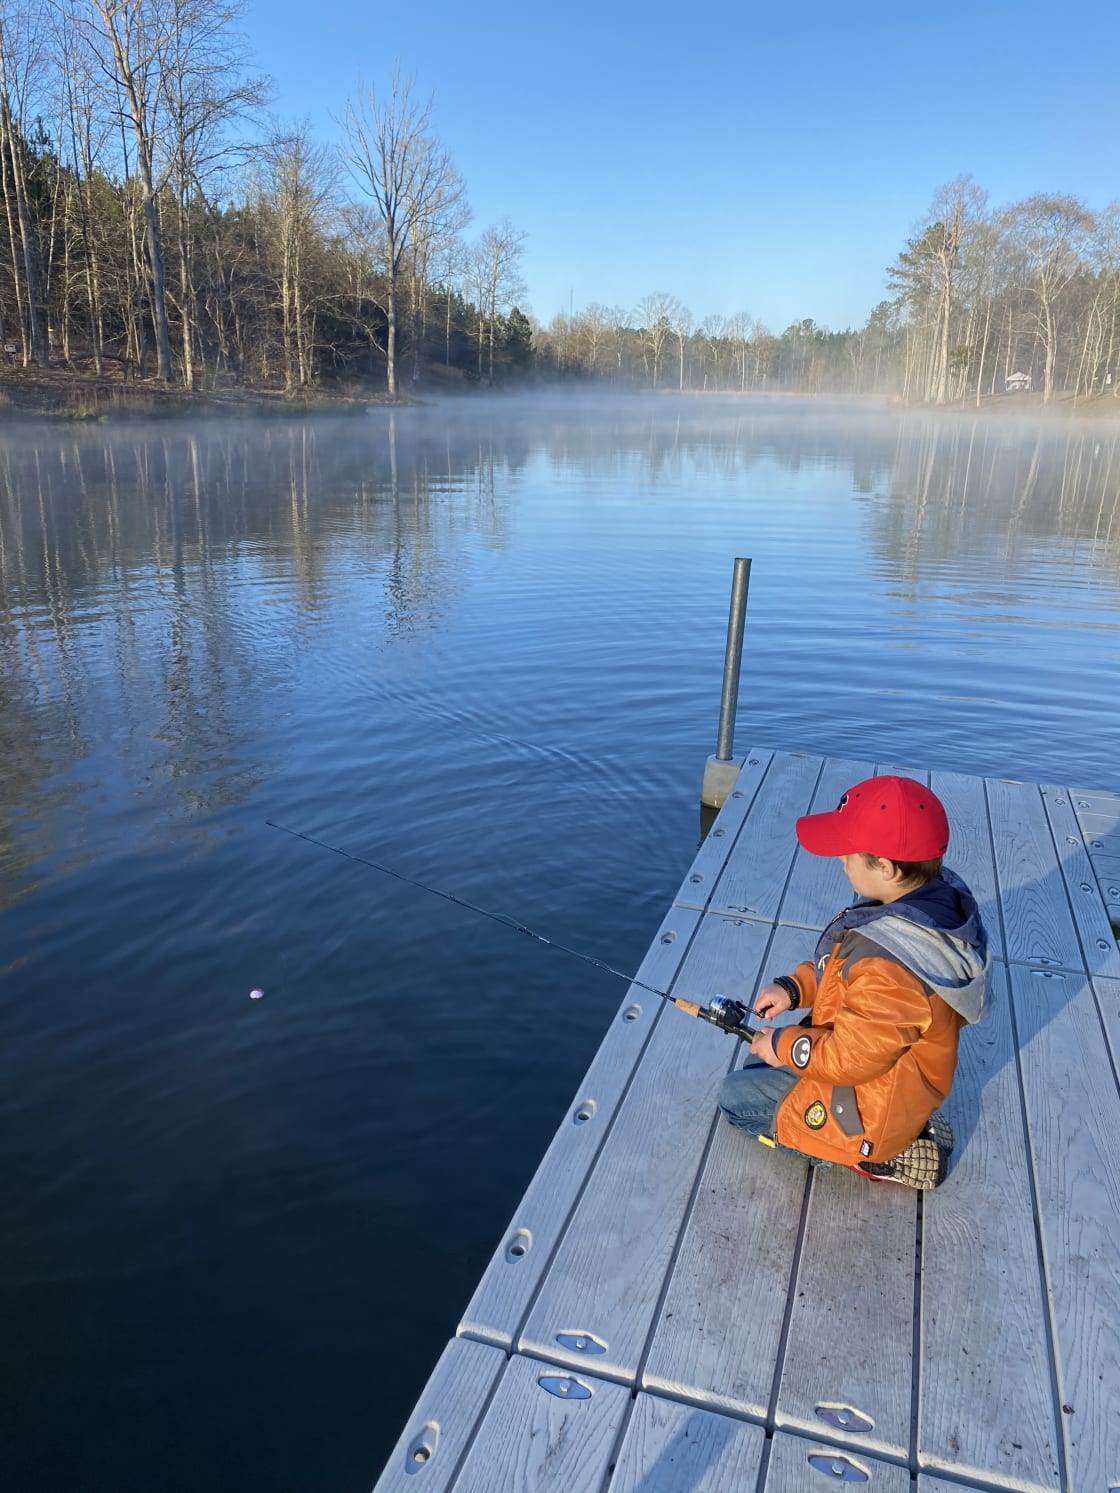 My son LOVED fishing off the dock. I know there are big fish in there! 